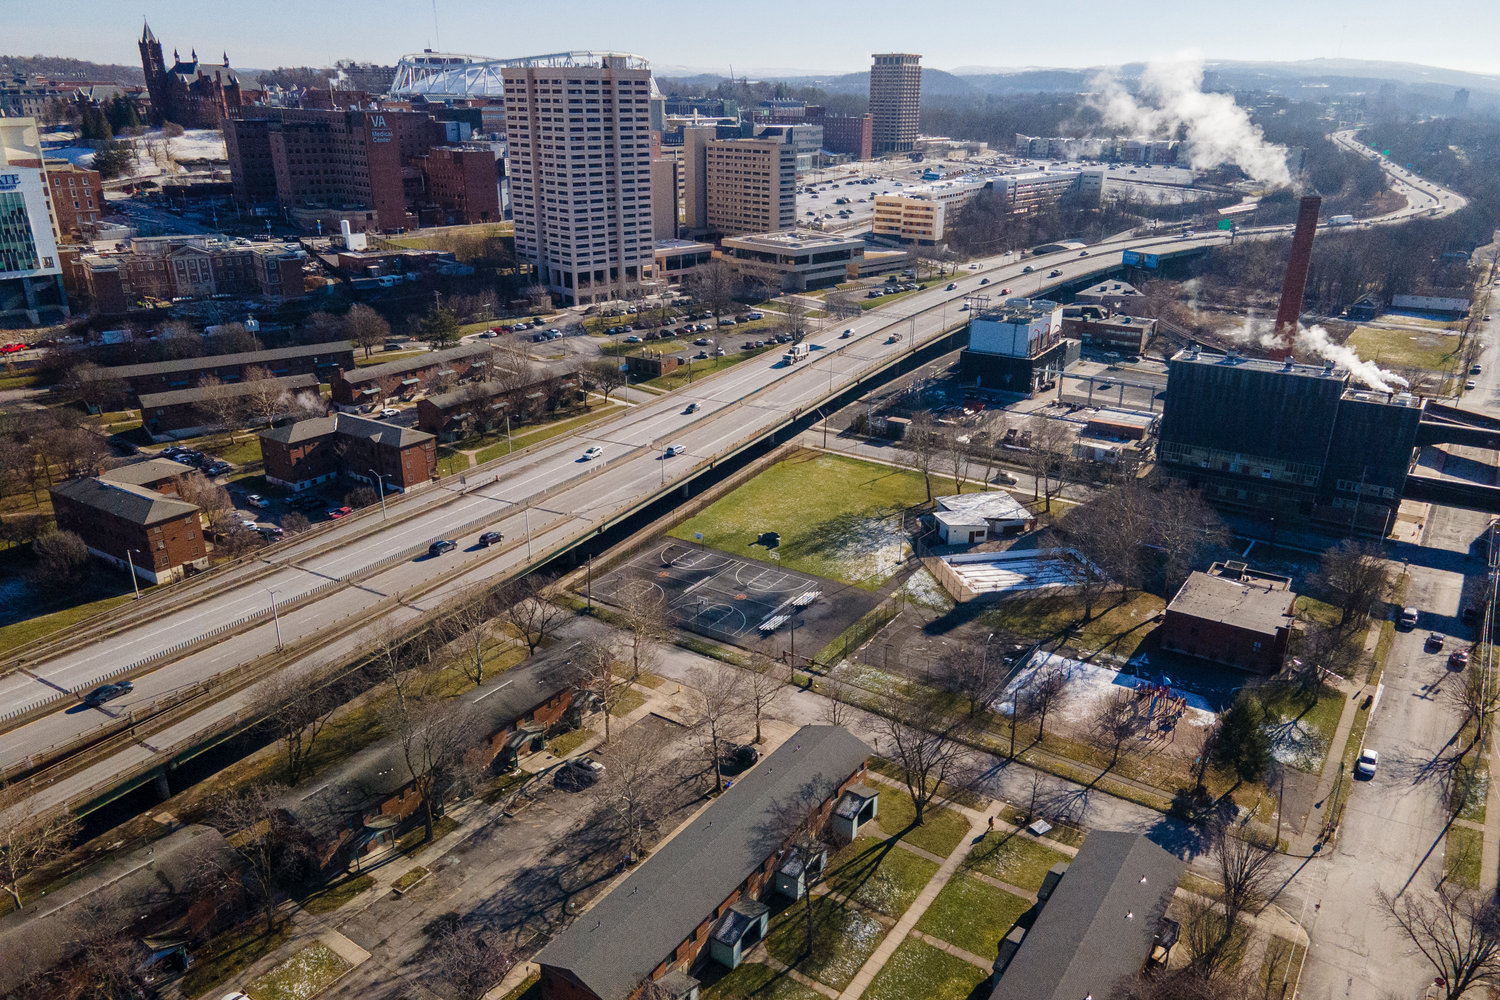 Interstate 81 passes through downtown Syracuse, N.Y., on Monday, Jan. 16, 2023. On the west side of the roadway are the Pioneer Homes public housing projects. Hospitals, hotels, Syracuse University buildings, and other structures are visible on the east side. (AP Photo/Ted Shaffrey)